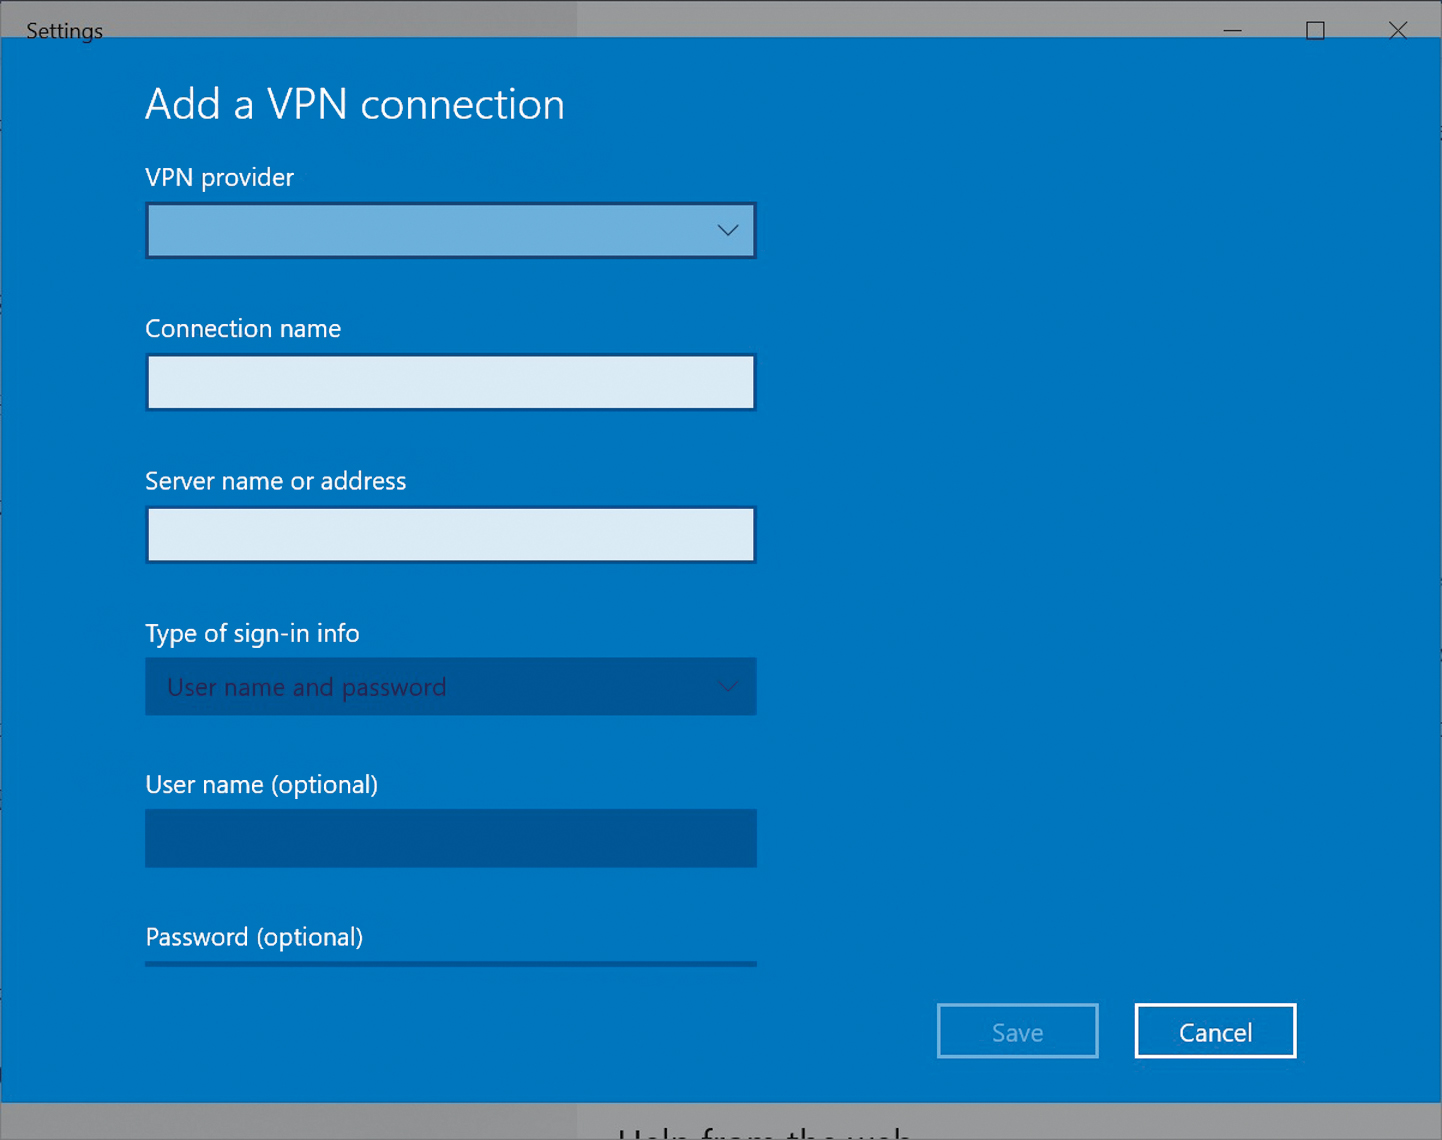 The dialog box represents Settings and is titled Add a V P N connection. V P N provider dropdown box, connection name textbox, server name or address textbox are shown. Type of sign in info dropdown is selected as Username and password. User name (optional) and password (optional) textboxes are below them. Save and cancel buttons are at bottom right of the dialog box.
